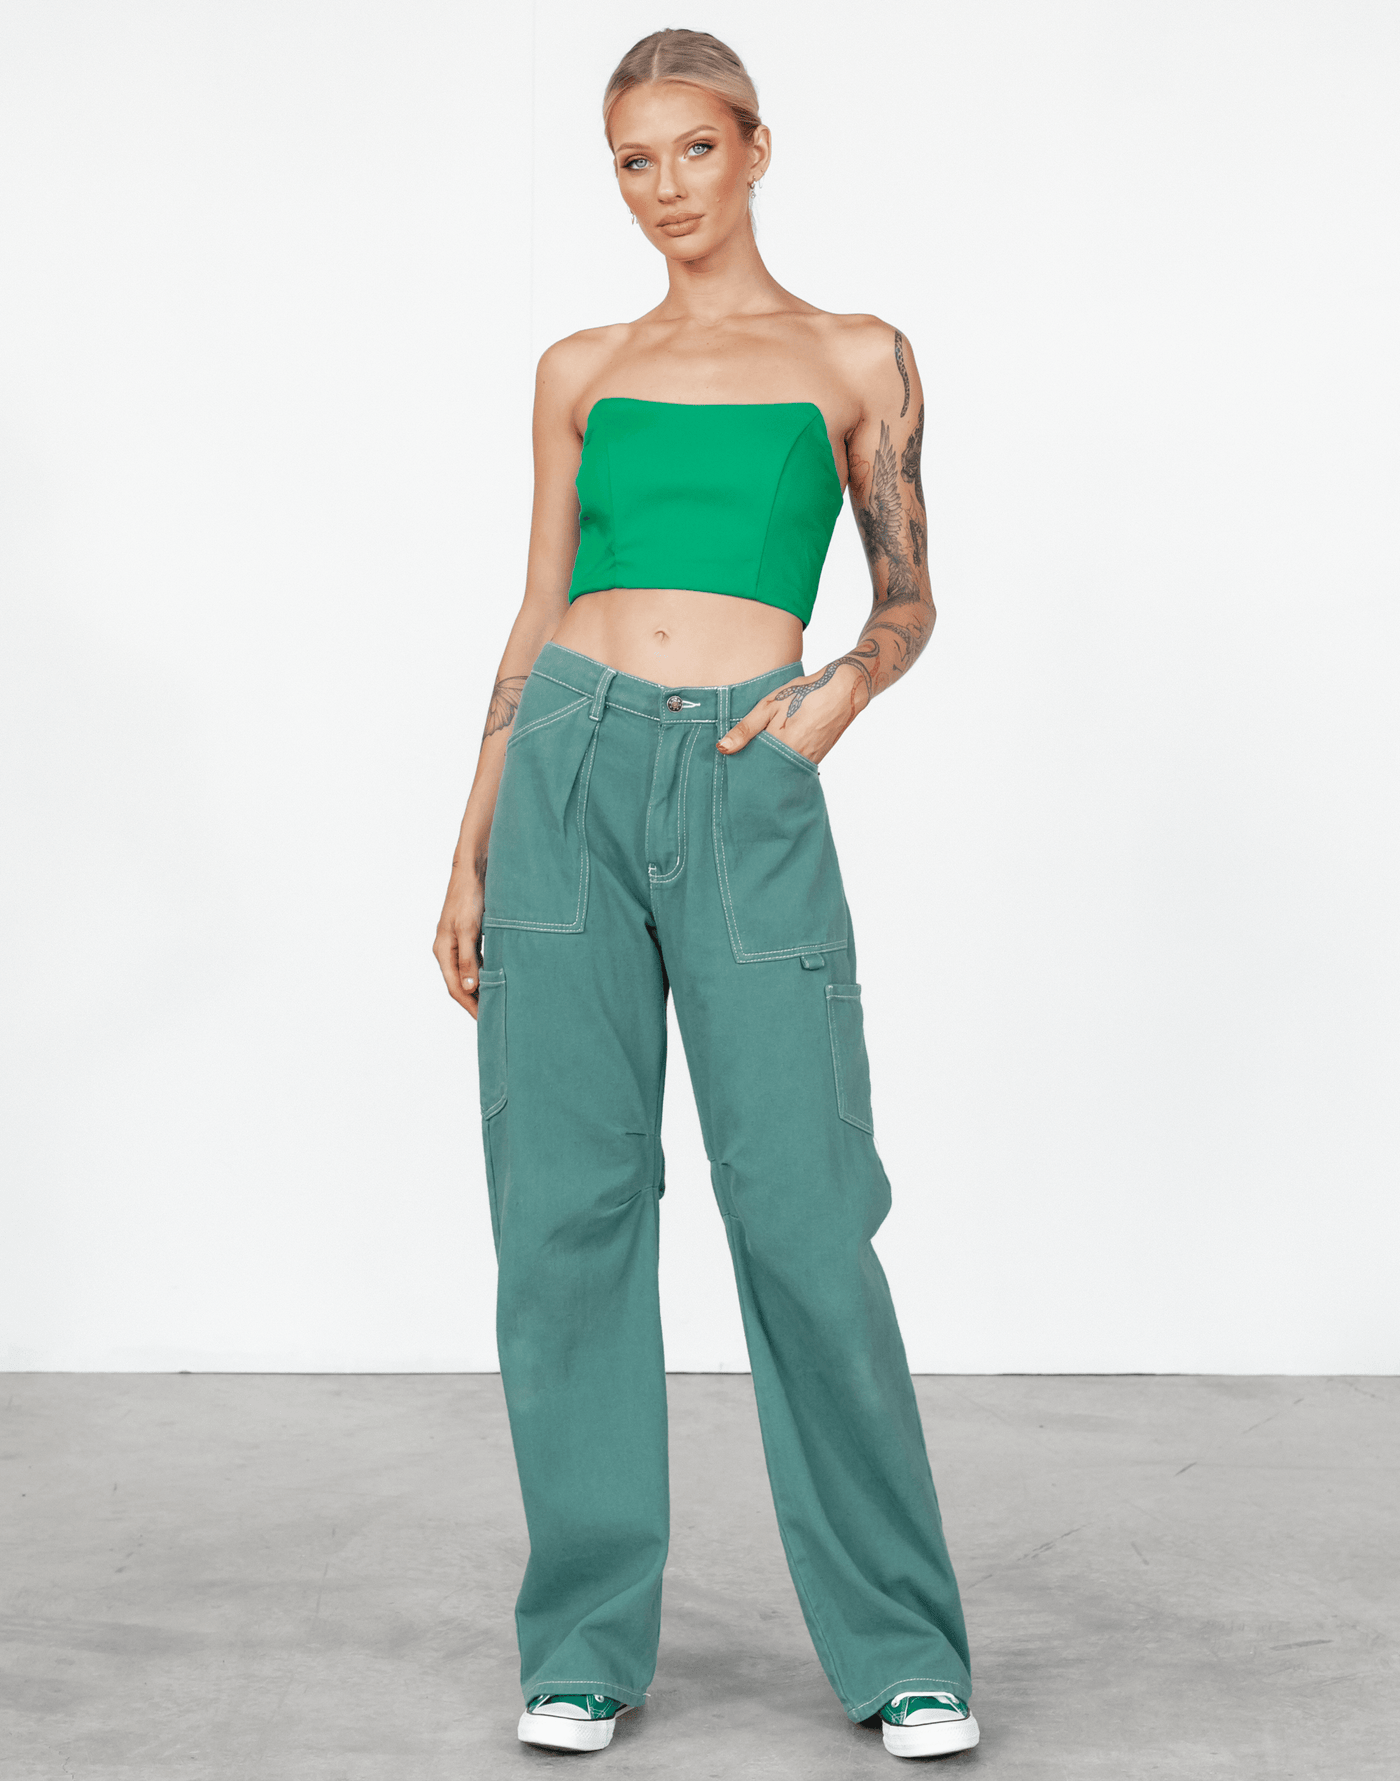 Close To You Corset Top (Green) - Fitted Crop Top - Women's Top - Charcoal Clothing